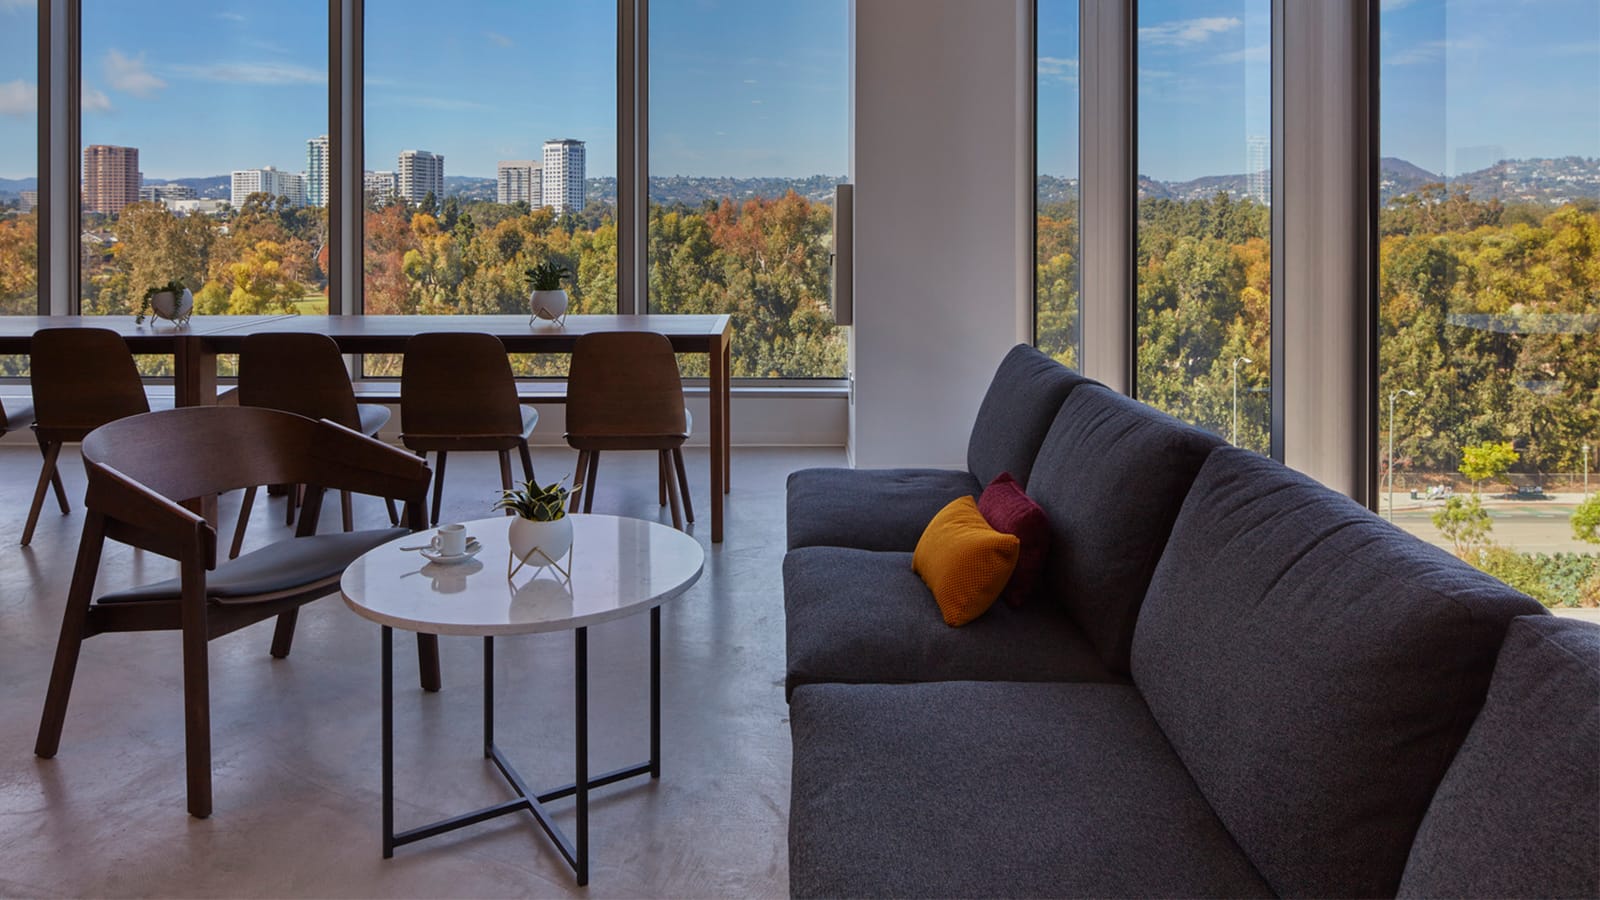 Thompson Coburn's Los Angeles Office has fantastic views of the city